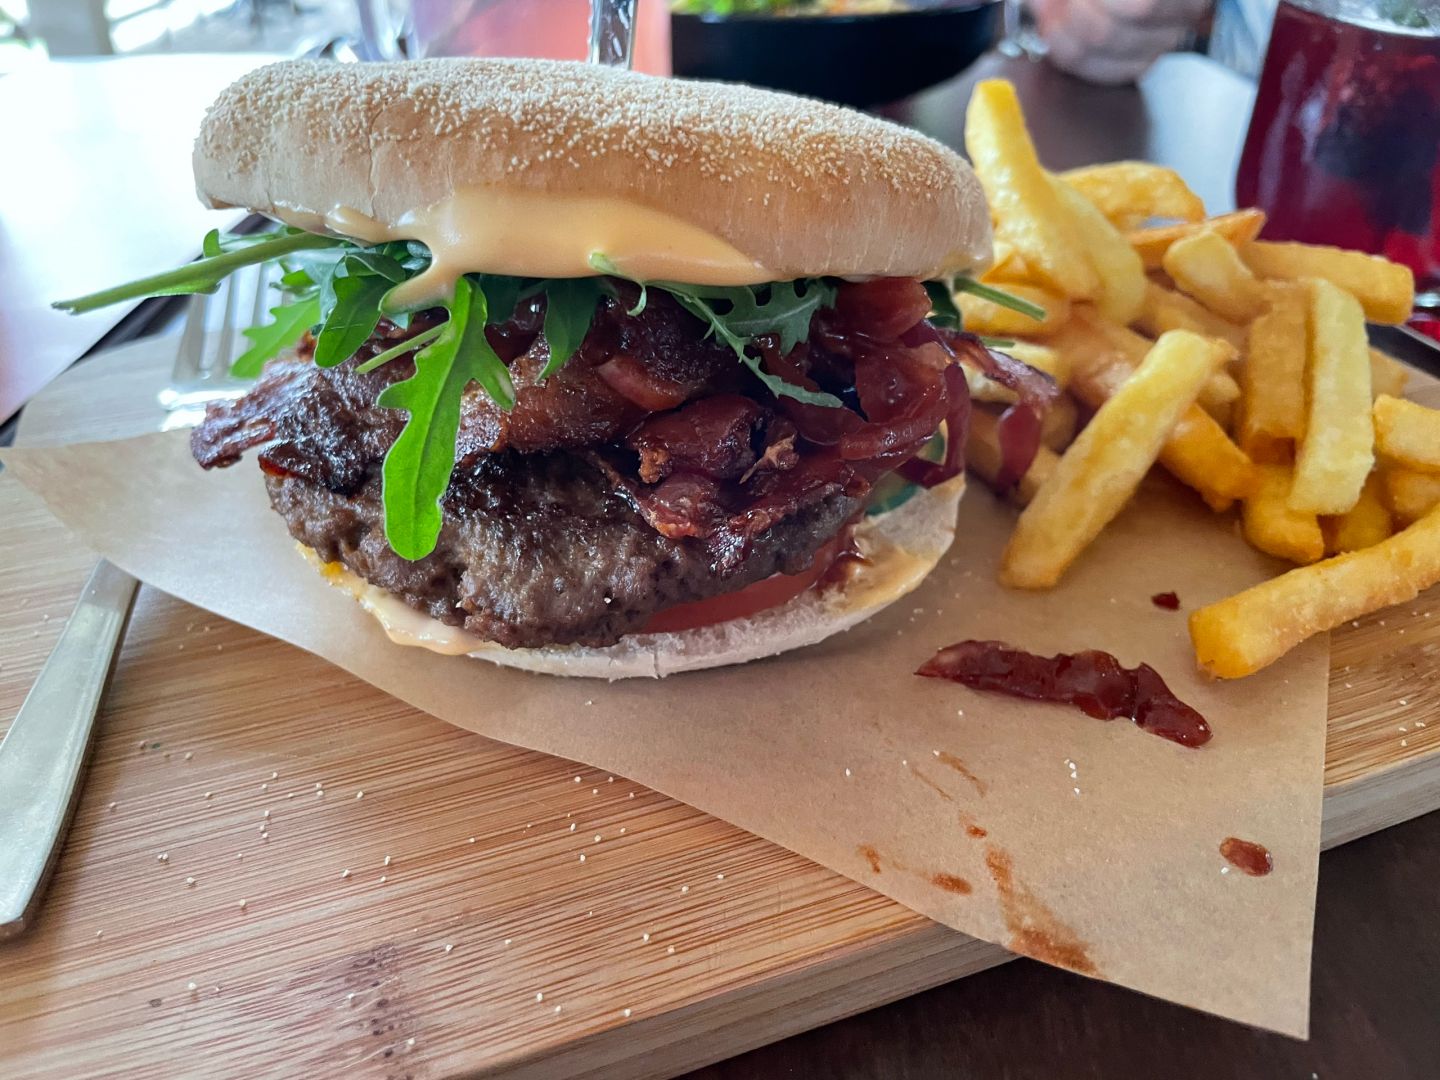 Close-up of burger and Fries on a wooden board